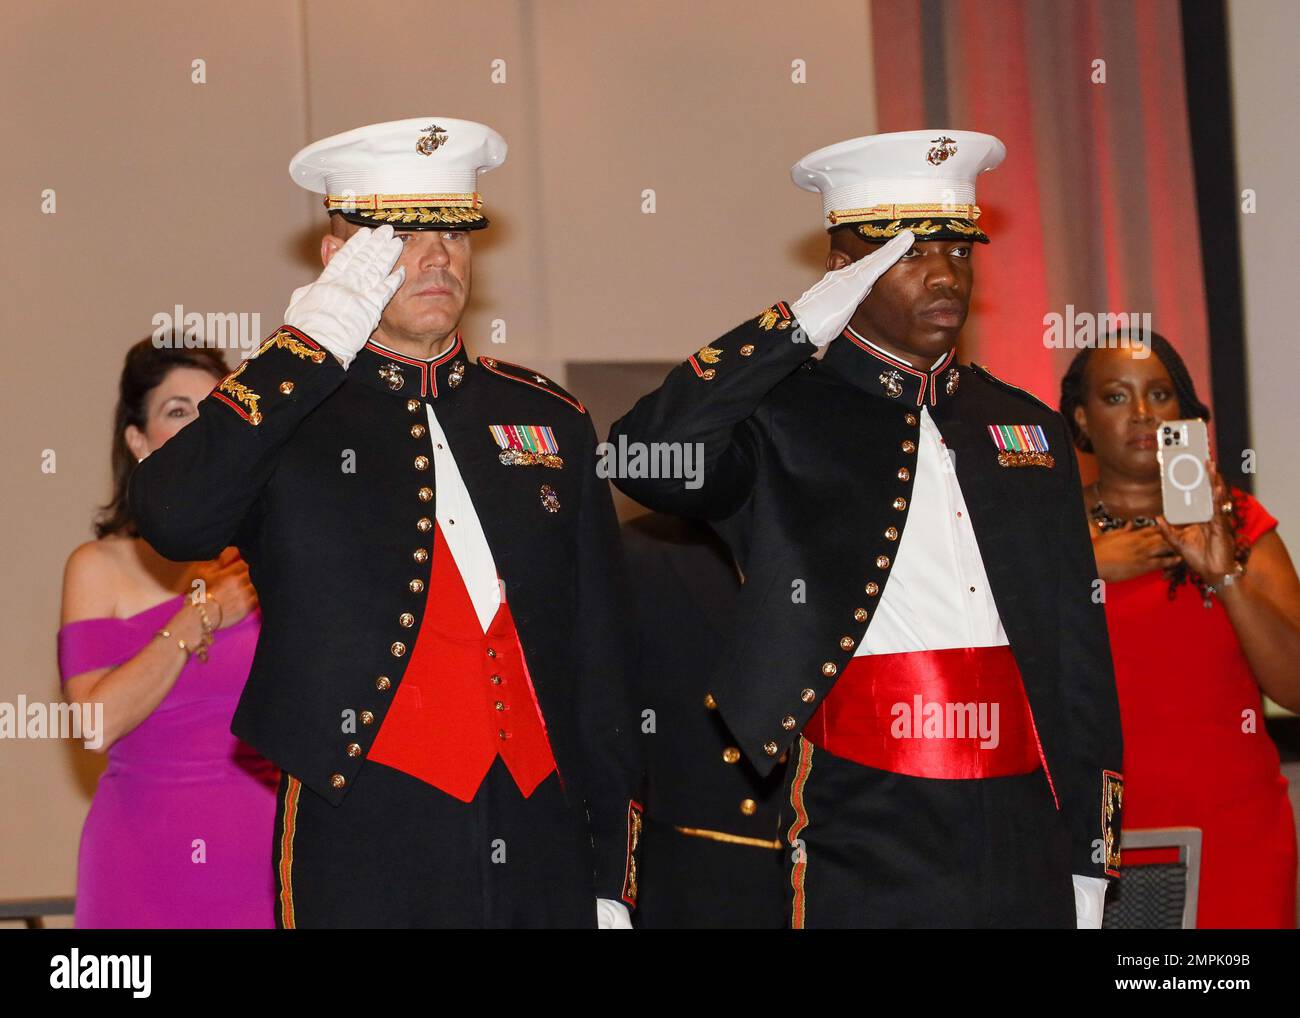 U.S. Marine Corps Brig. Gen. Walker M. Field, left, Marine Corps Recruit Depot Parris Island and Eastern Recruiting Region commanding general, and Maj. Dwayne Littlejohn, right, Recruiting Station Fort Lauderdale commanding officer, salute the colors during the 247th Marine Corps Birthday Ball at the Hilton Miami Downtown in Miami, Florida, Oct. 29, 2022. A celebration for the Marine Corps birthday is held every year to reflect on the traditions, history, and legacy of the Marine Corps. Stock Photo